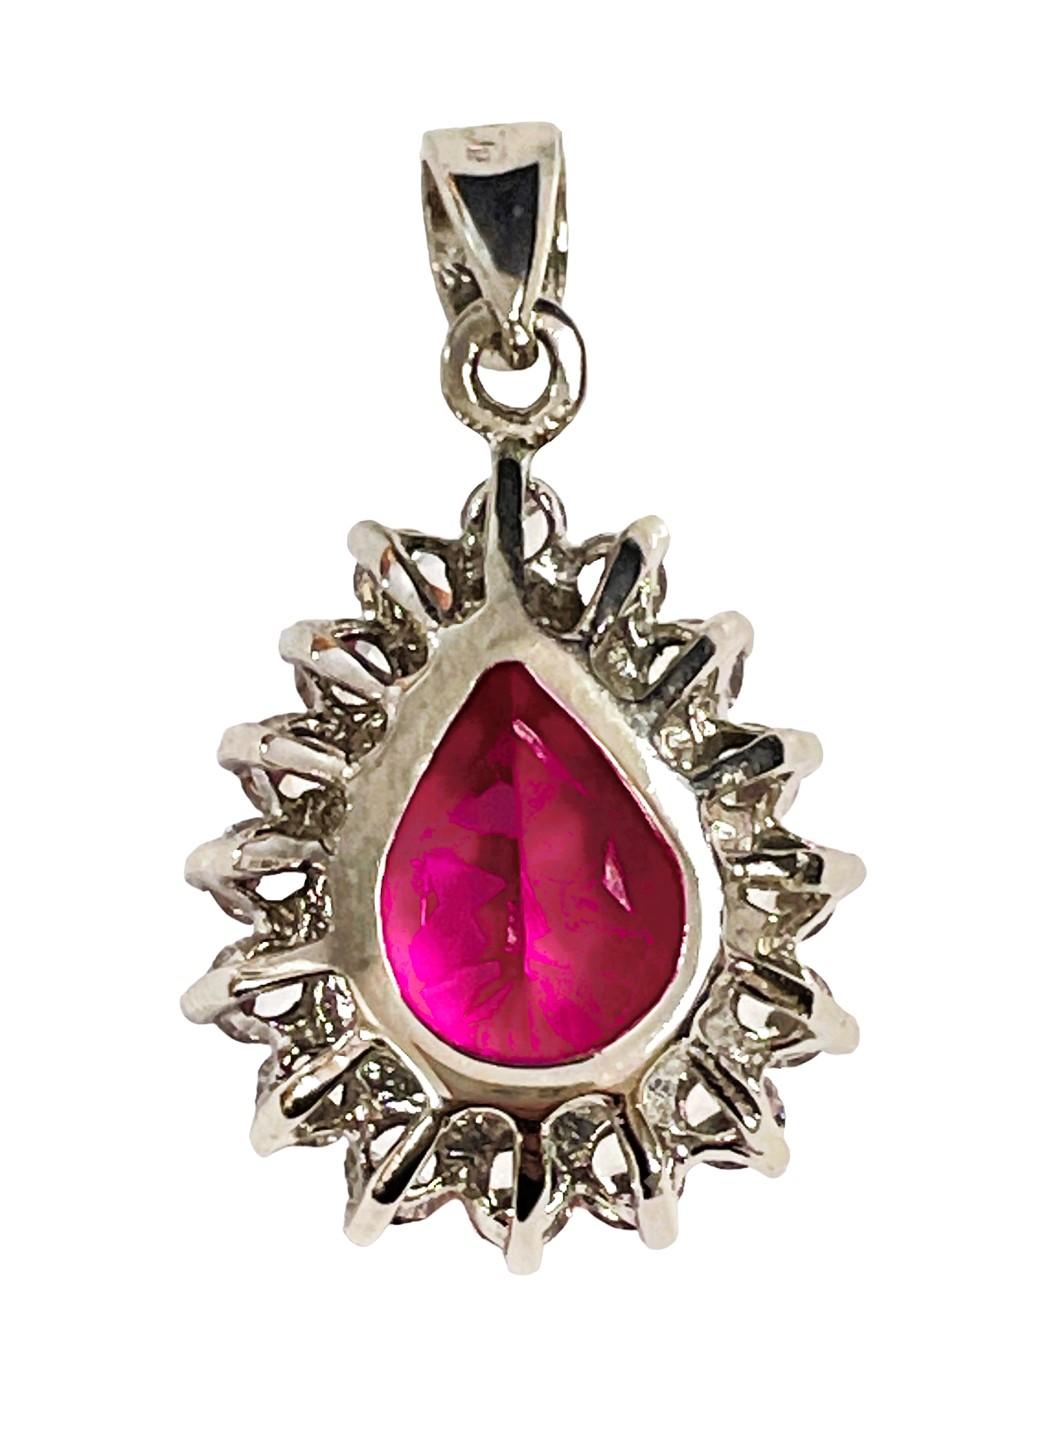 New African 8.7 Carat Raspberry Topaz and White Sapphire Sterling Pendant For Sale 1